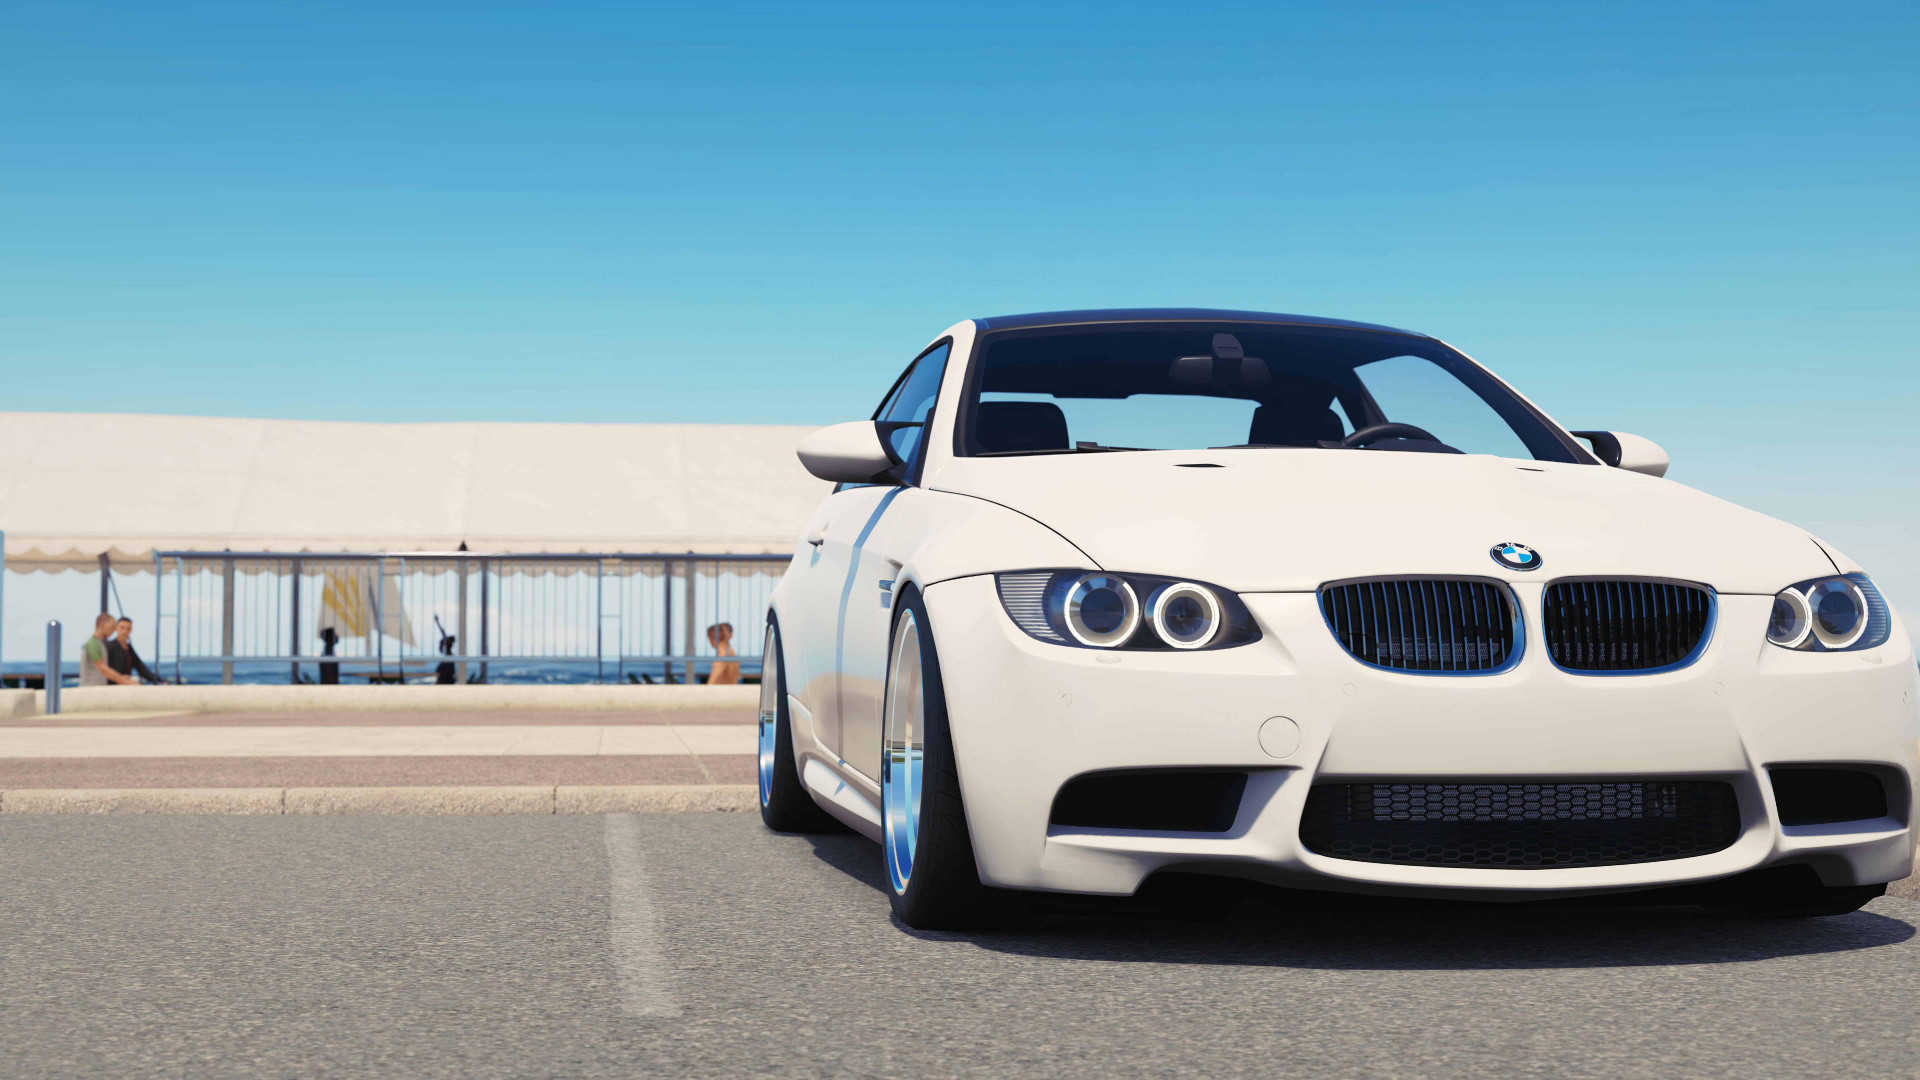 White Bmw m 3 Coupe Parked on Gray Asphalt Road During Daytime. Wallpaper in 1920x1080 Resolution